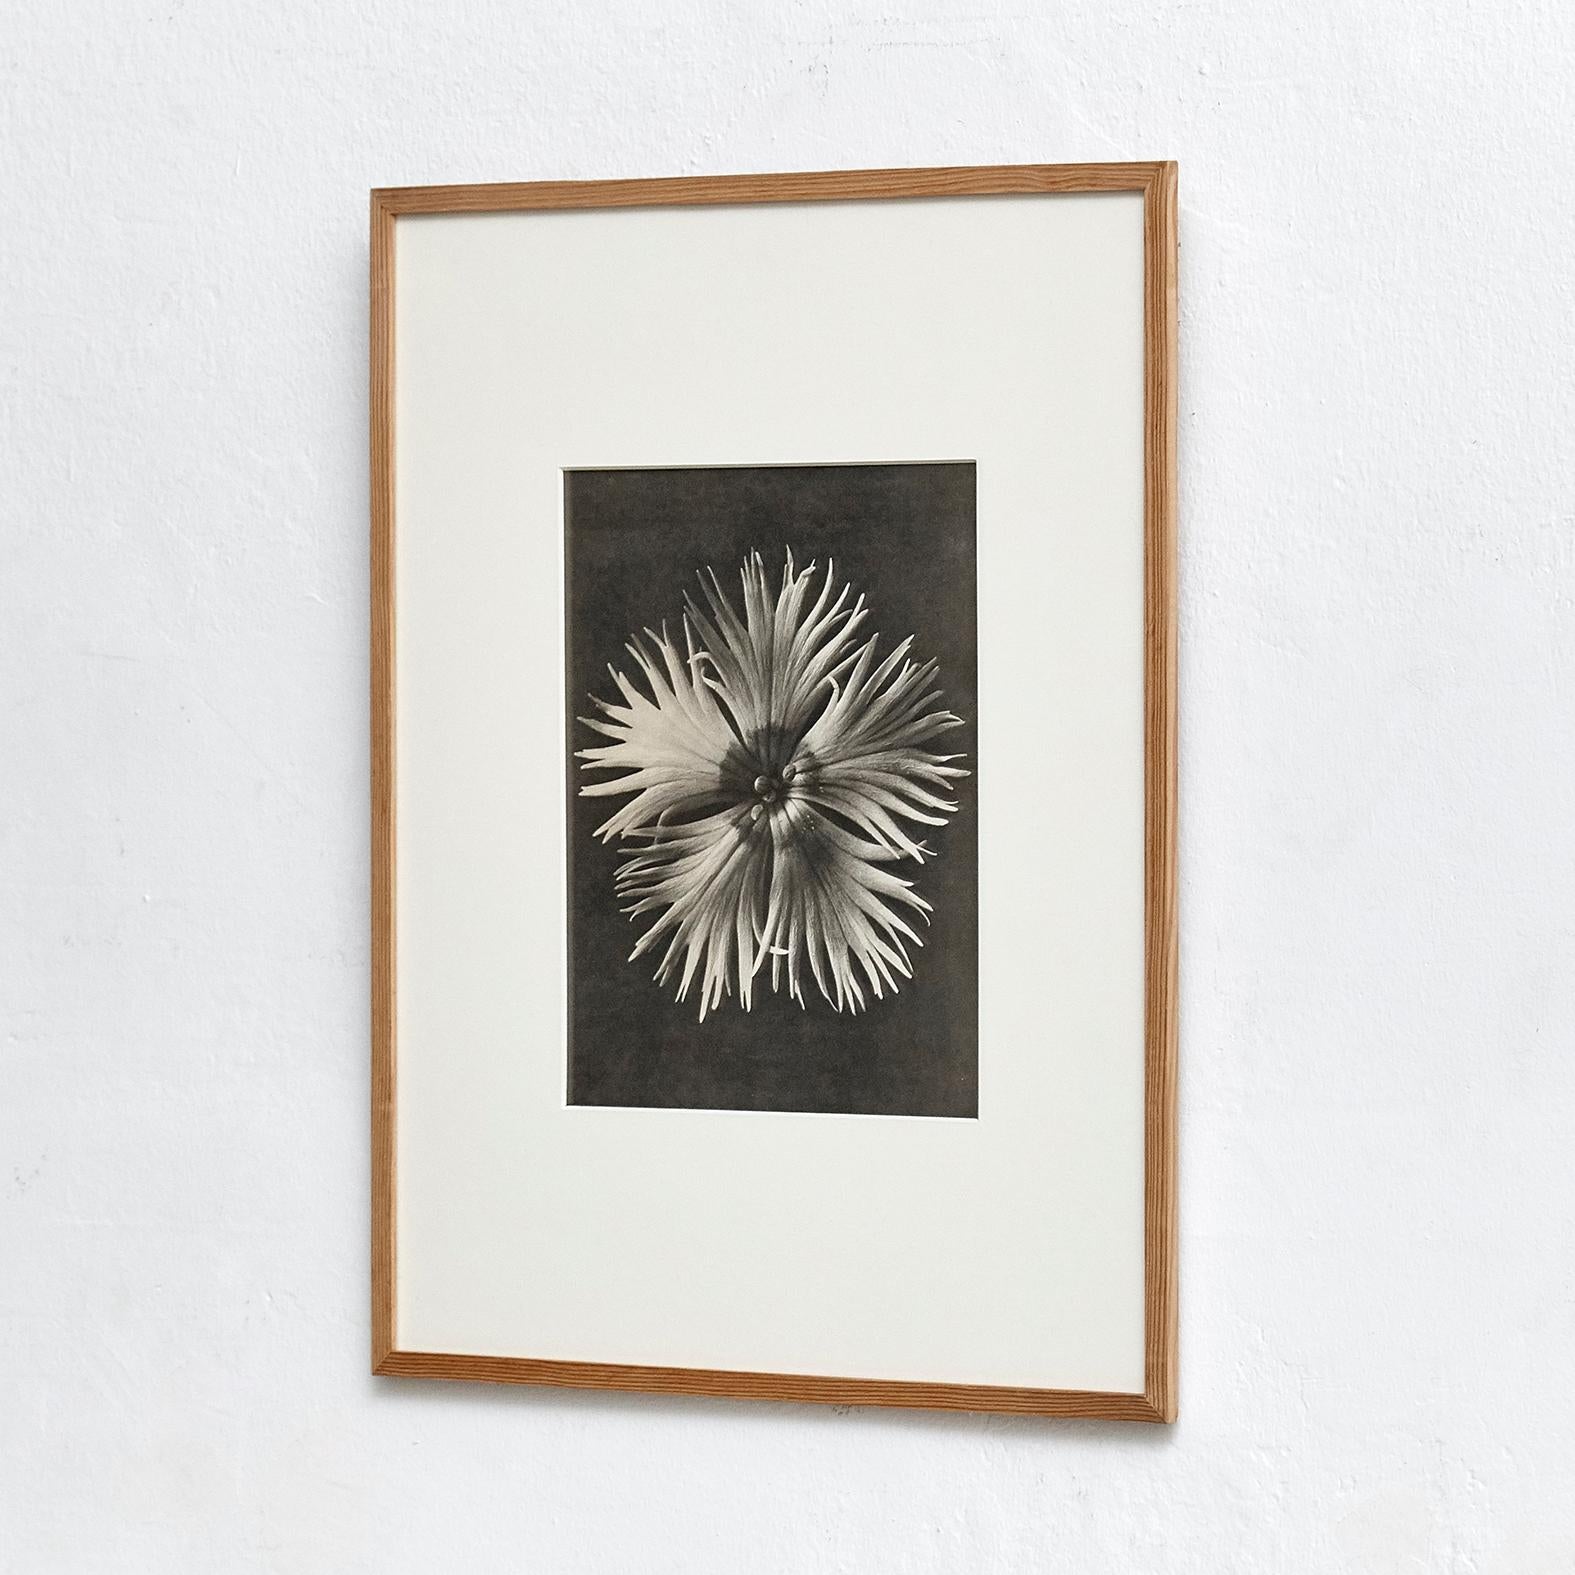 Karl Blossfeldt Photogravure from the edition of the book 'Wunder in der Natur' in 1942.

Photography number 14. 'Dianthus plumarius. Federnelke in 8 facher Vergrößerung.'

In original condition, with minor wear consistent with age and use,